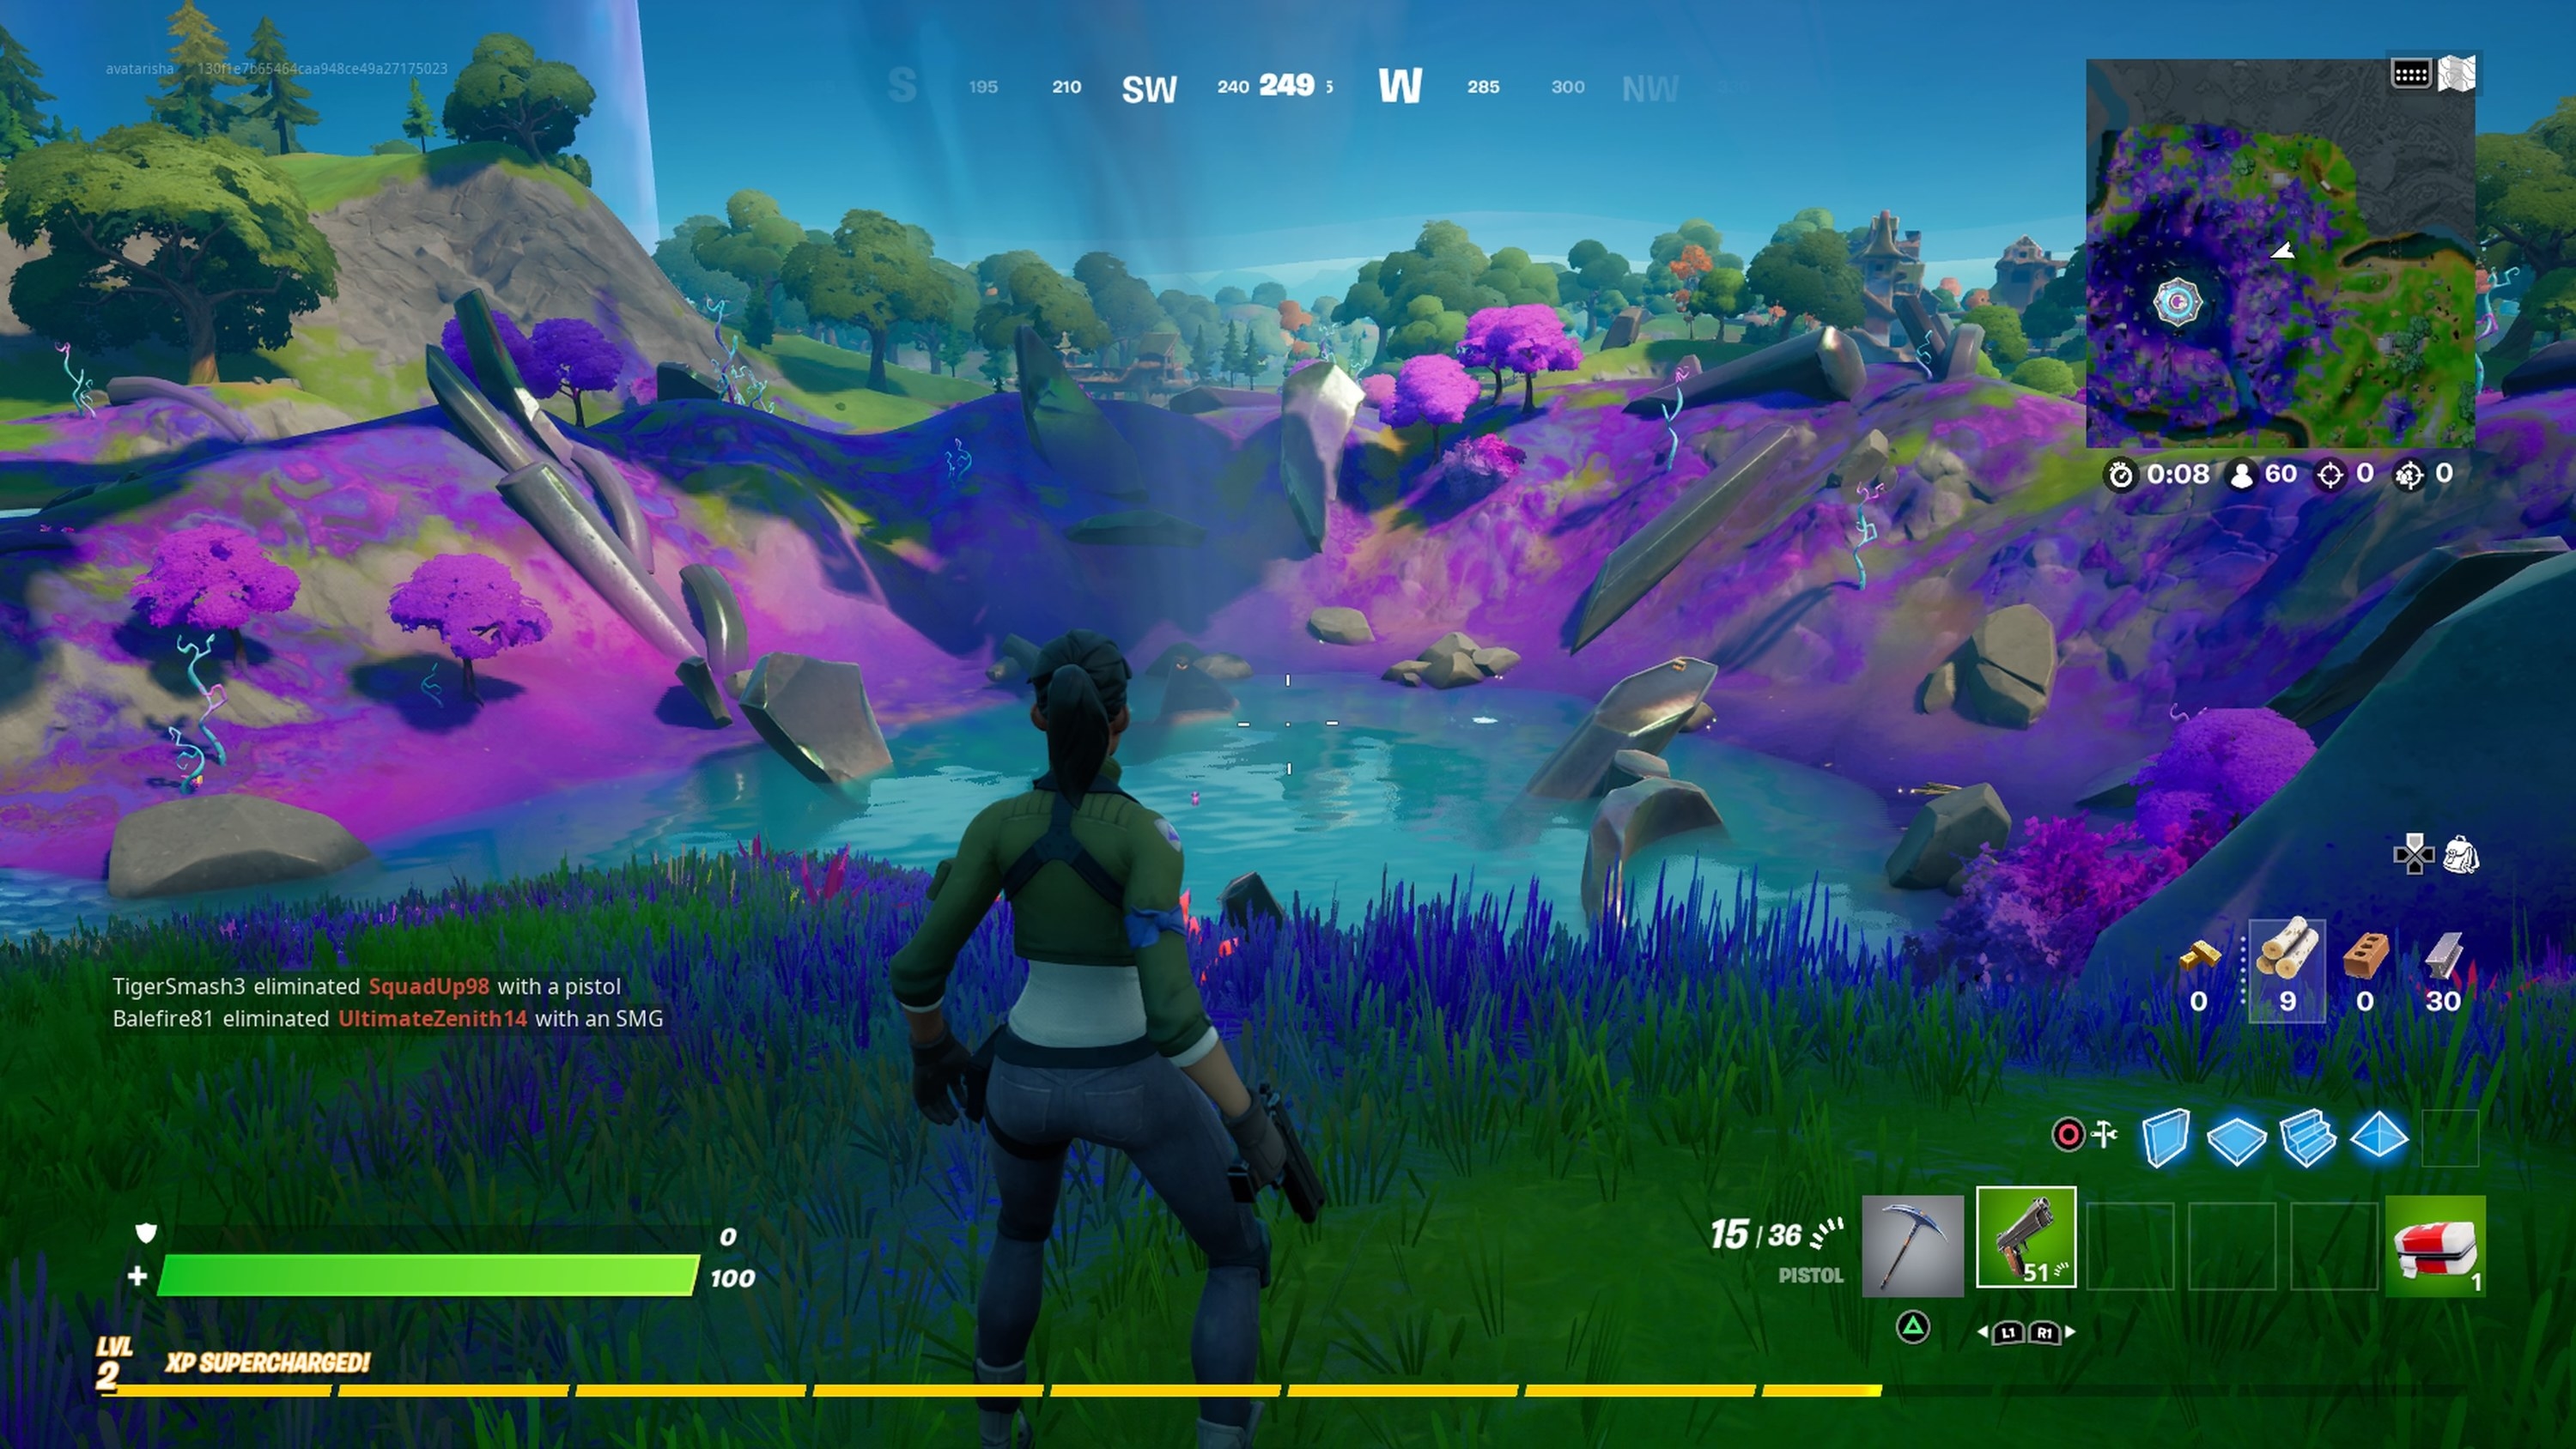 A Fortnite character standing in a grassy field; they are overlooking a lake that has purple-pink trees surrounding it